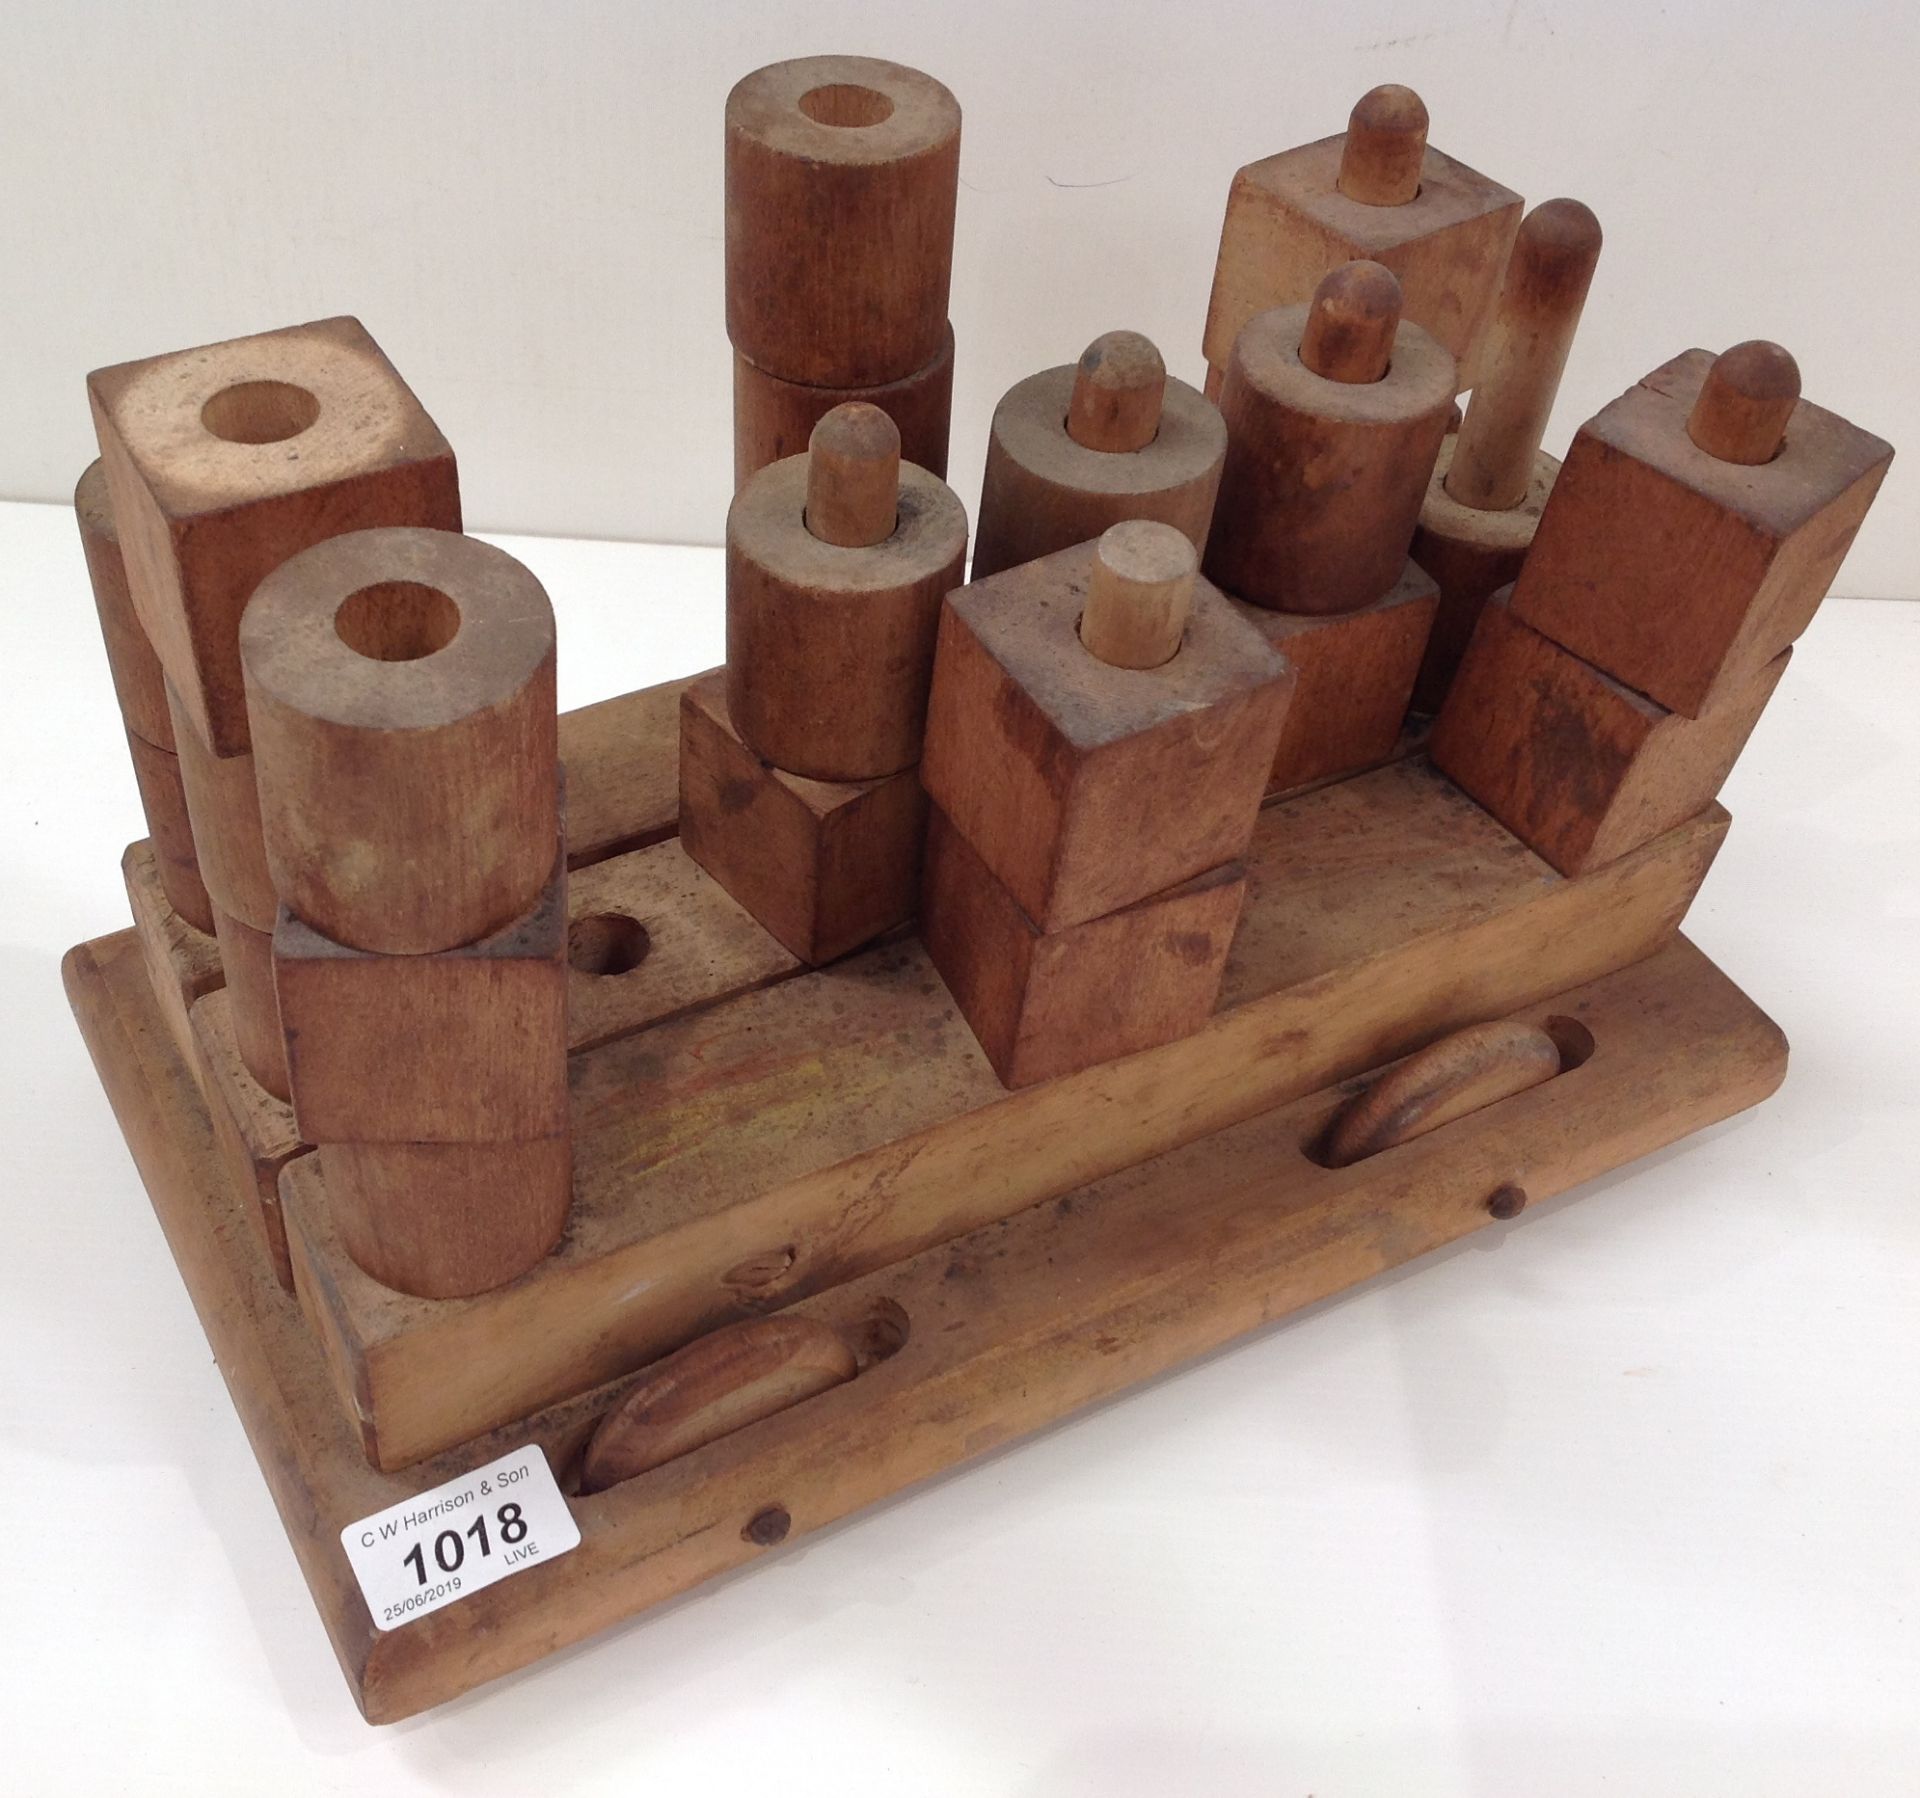 A wooden pull-a-long toy with a quantity of wooden building blocks